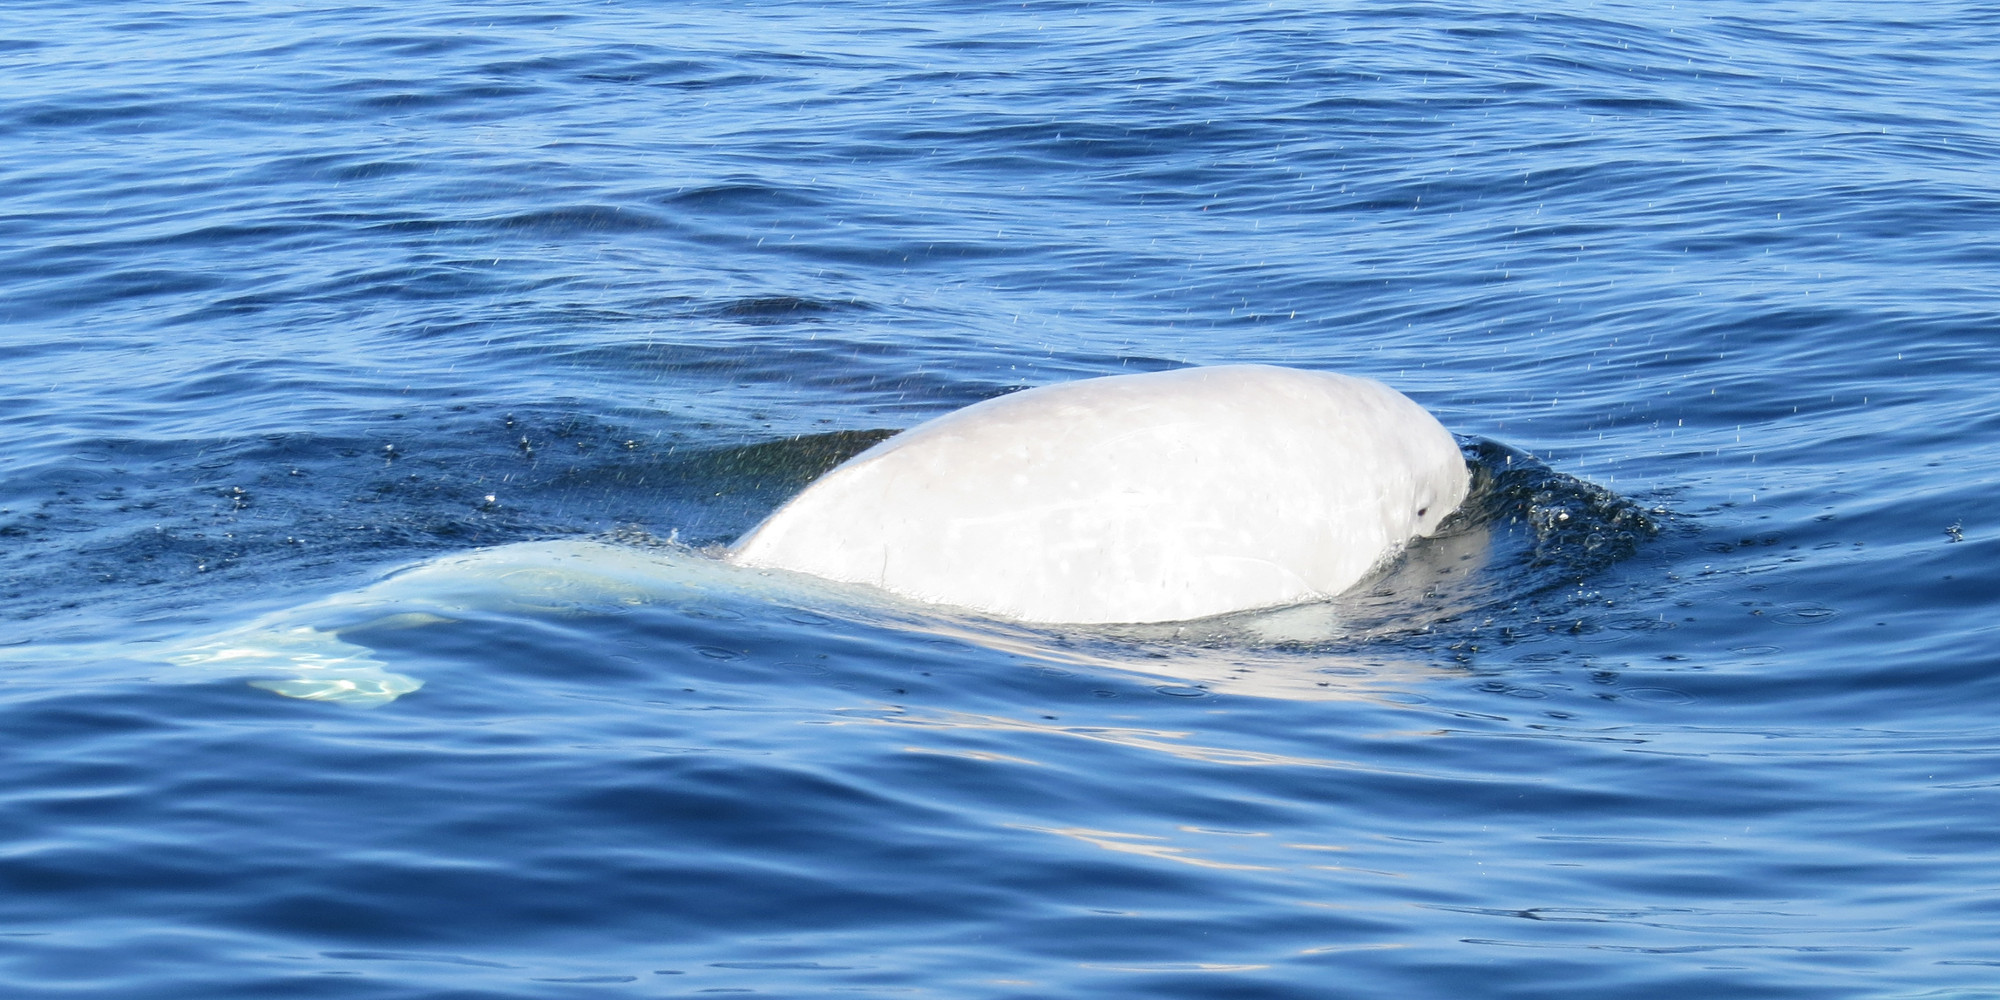 Beluga whale breaking the surface of the water